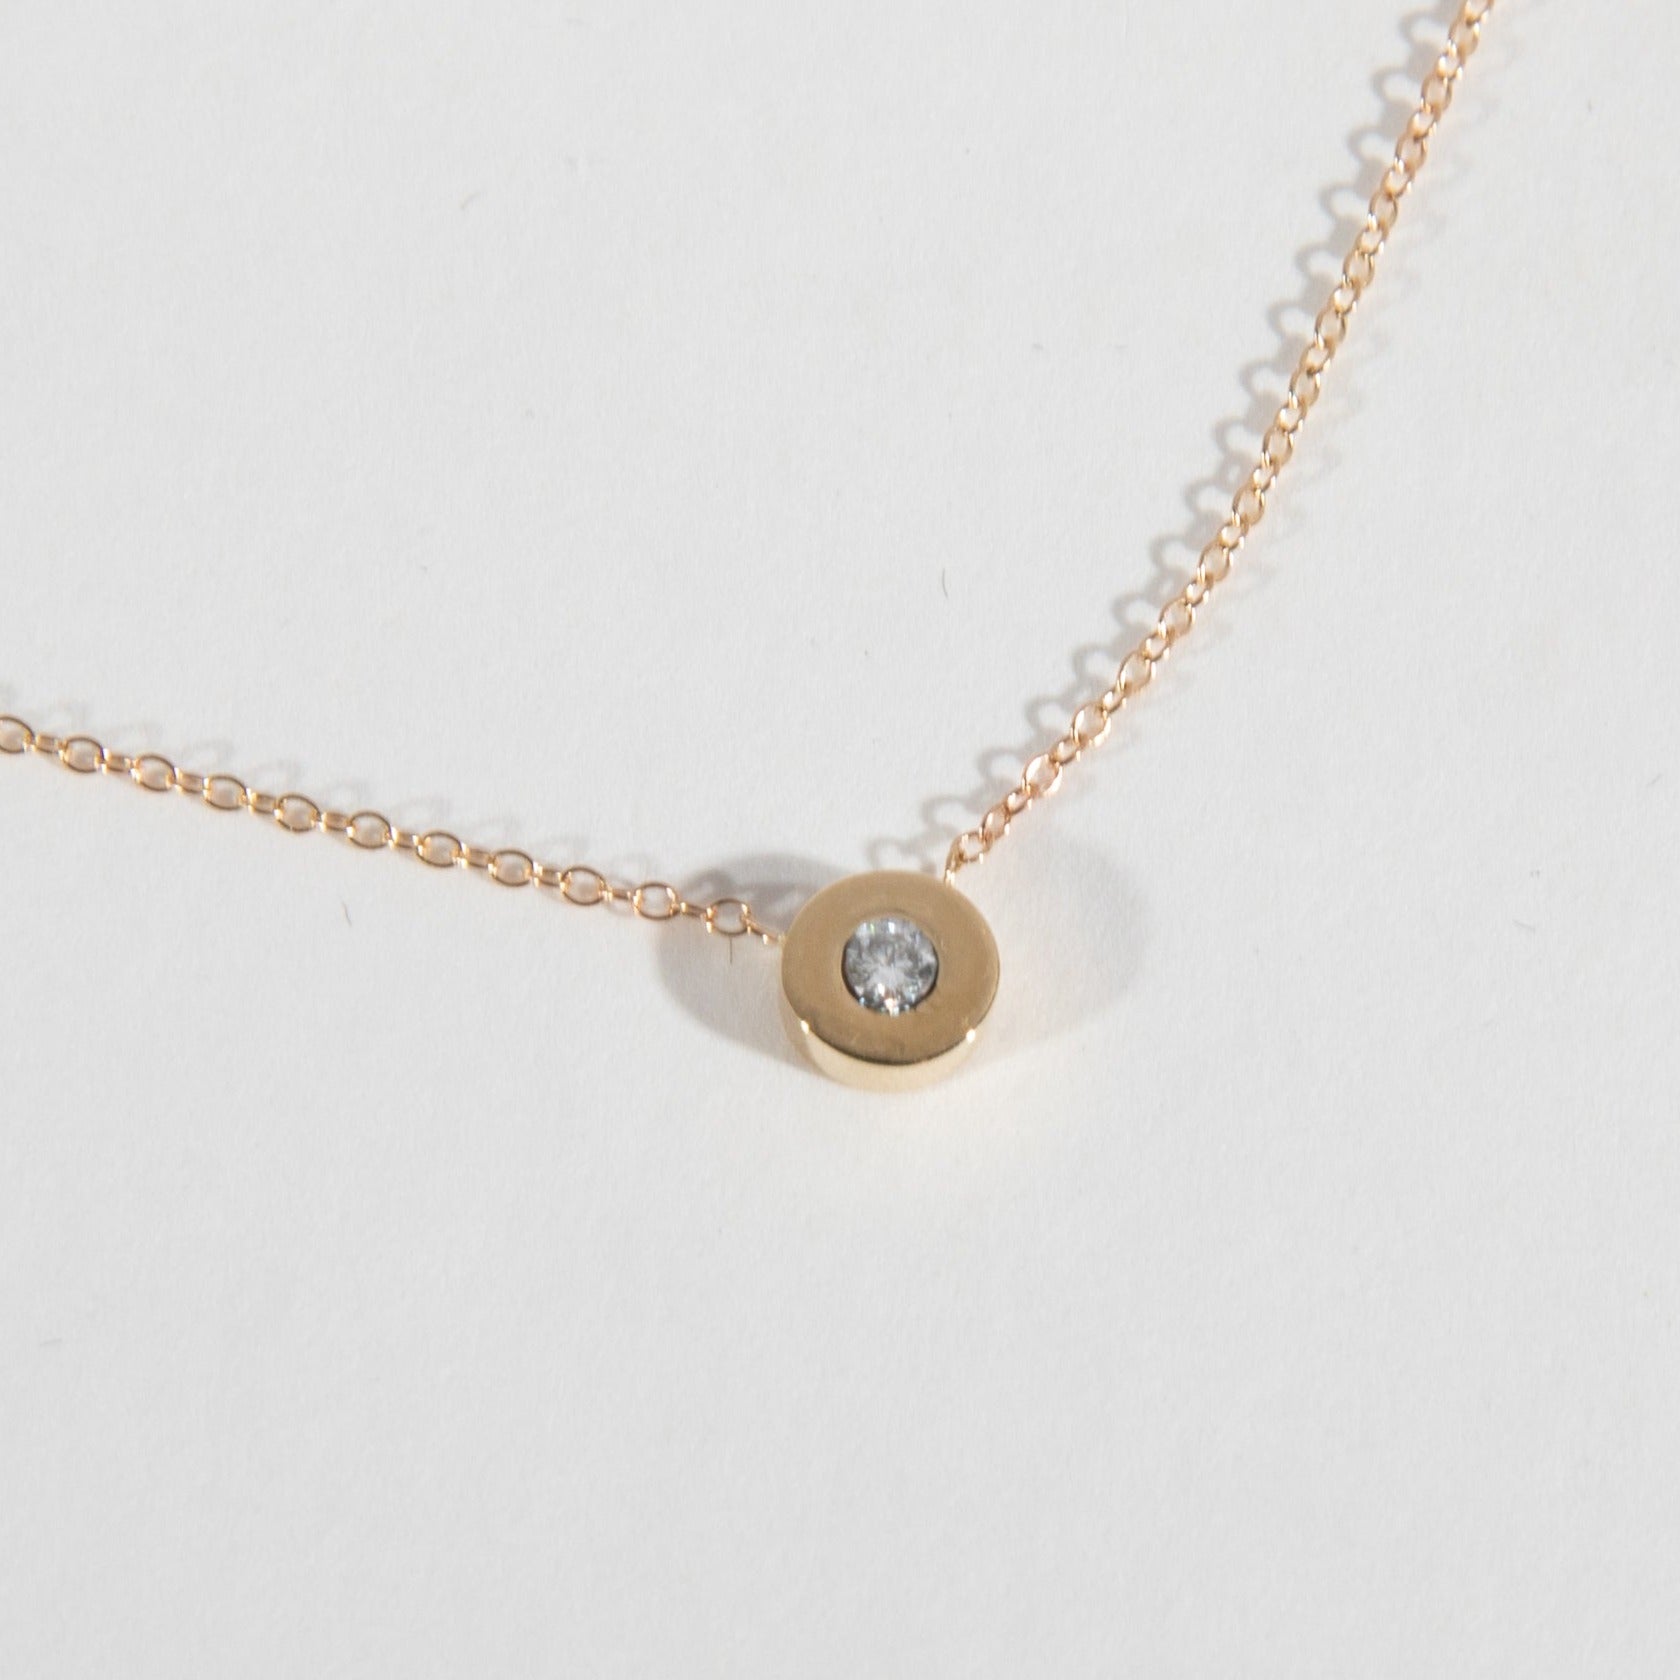 Shara Minimal Necklace in 14k Gold set with lab-grown diamonds By SHW Fine Jewelry New York City